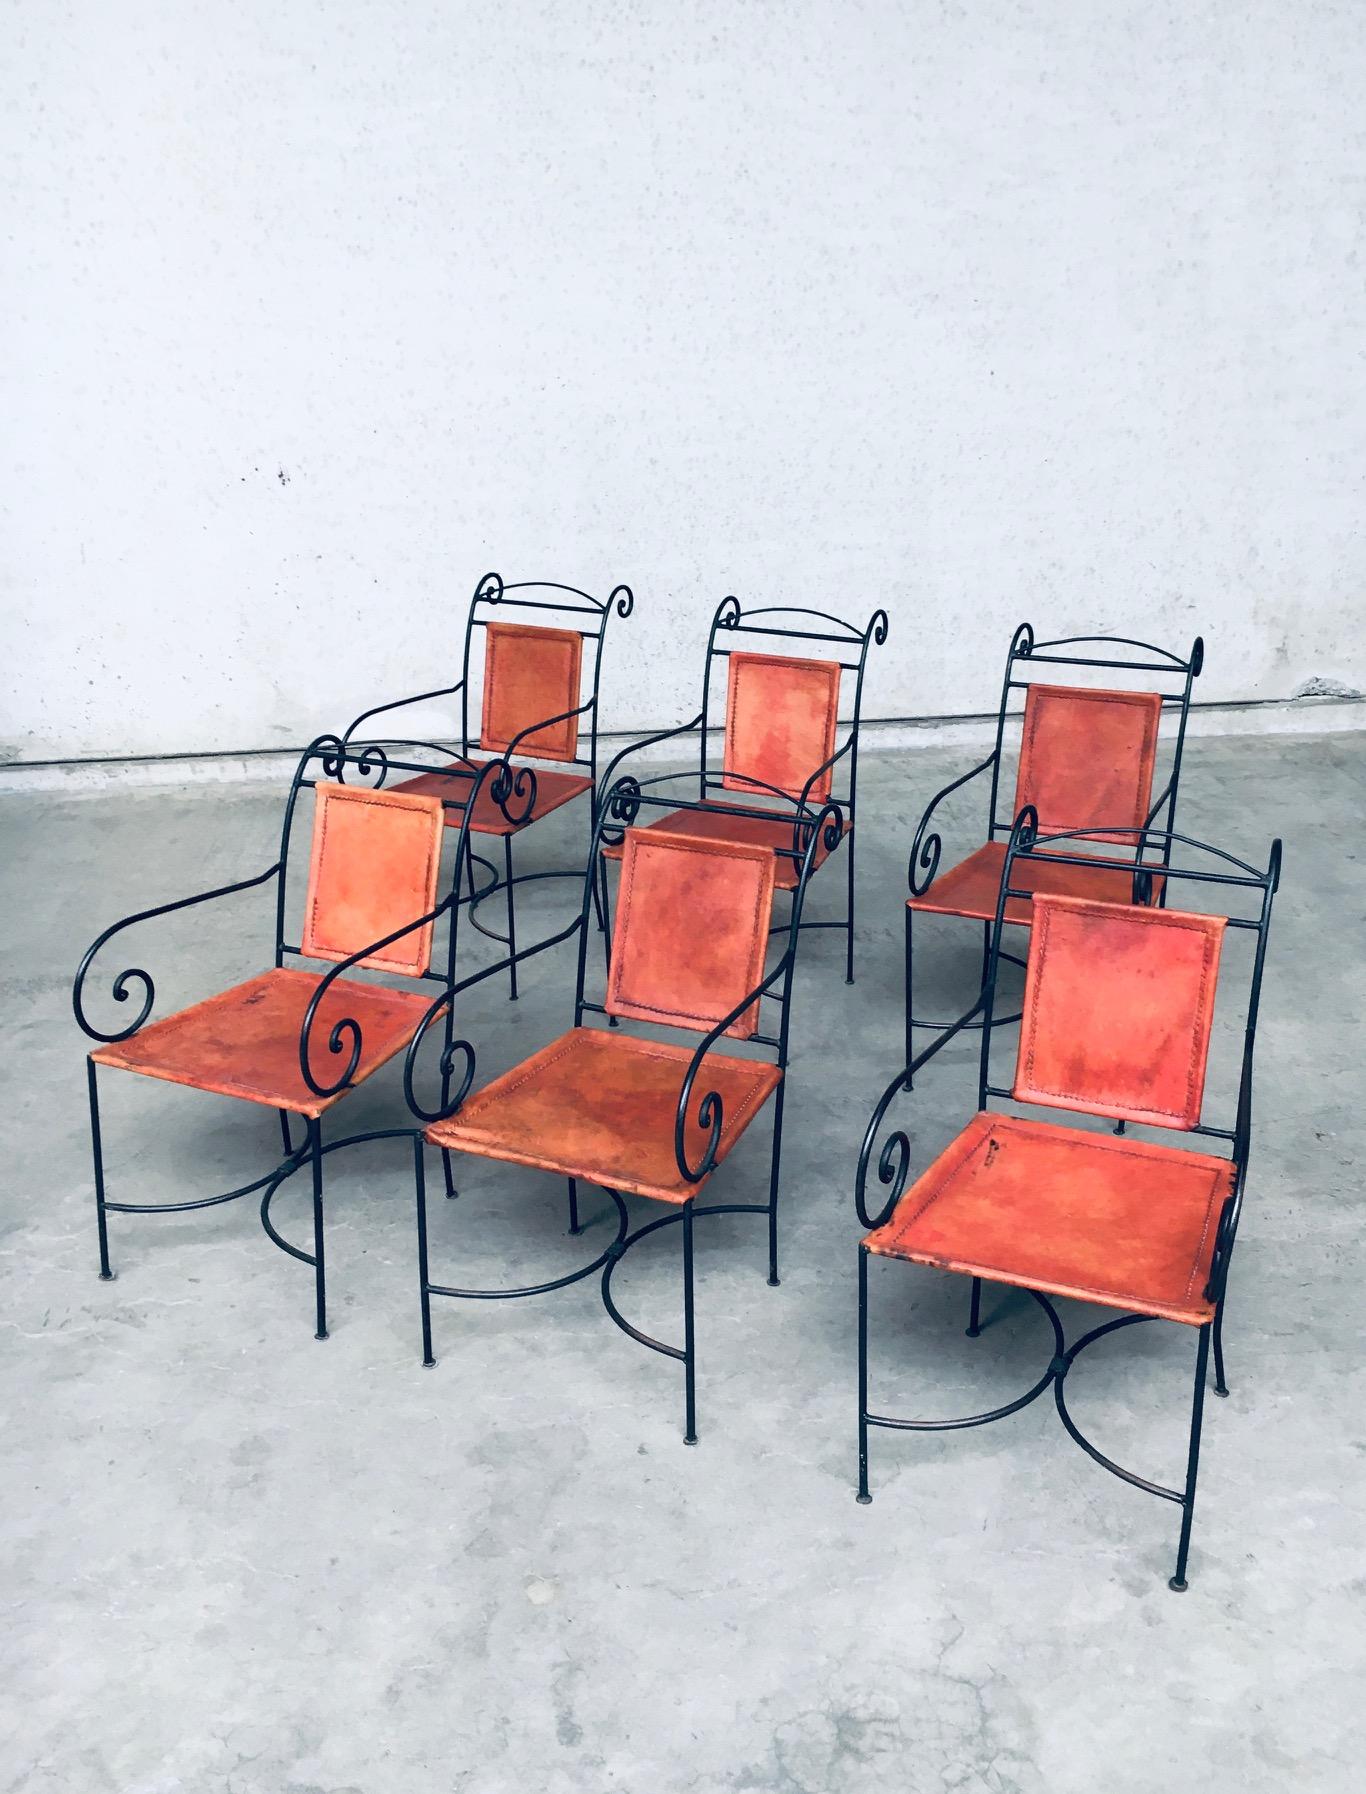 Vintage Design wrought iron and cognac leather dining chair set of 6, made in Spain 1960's. Swirl shaped wrought iron metal frame with thick cognac colored leather seat and back. Hand crafted and forged. All chairs have a nice patina on the leather